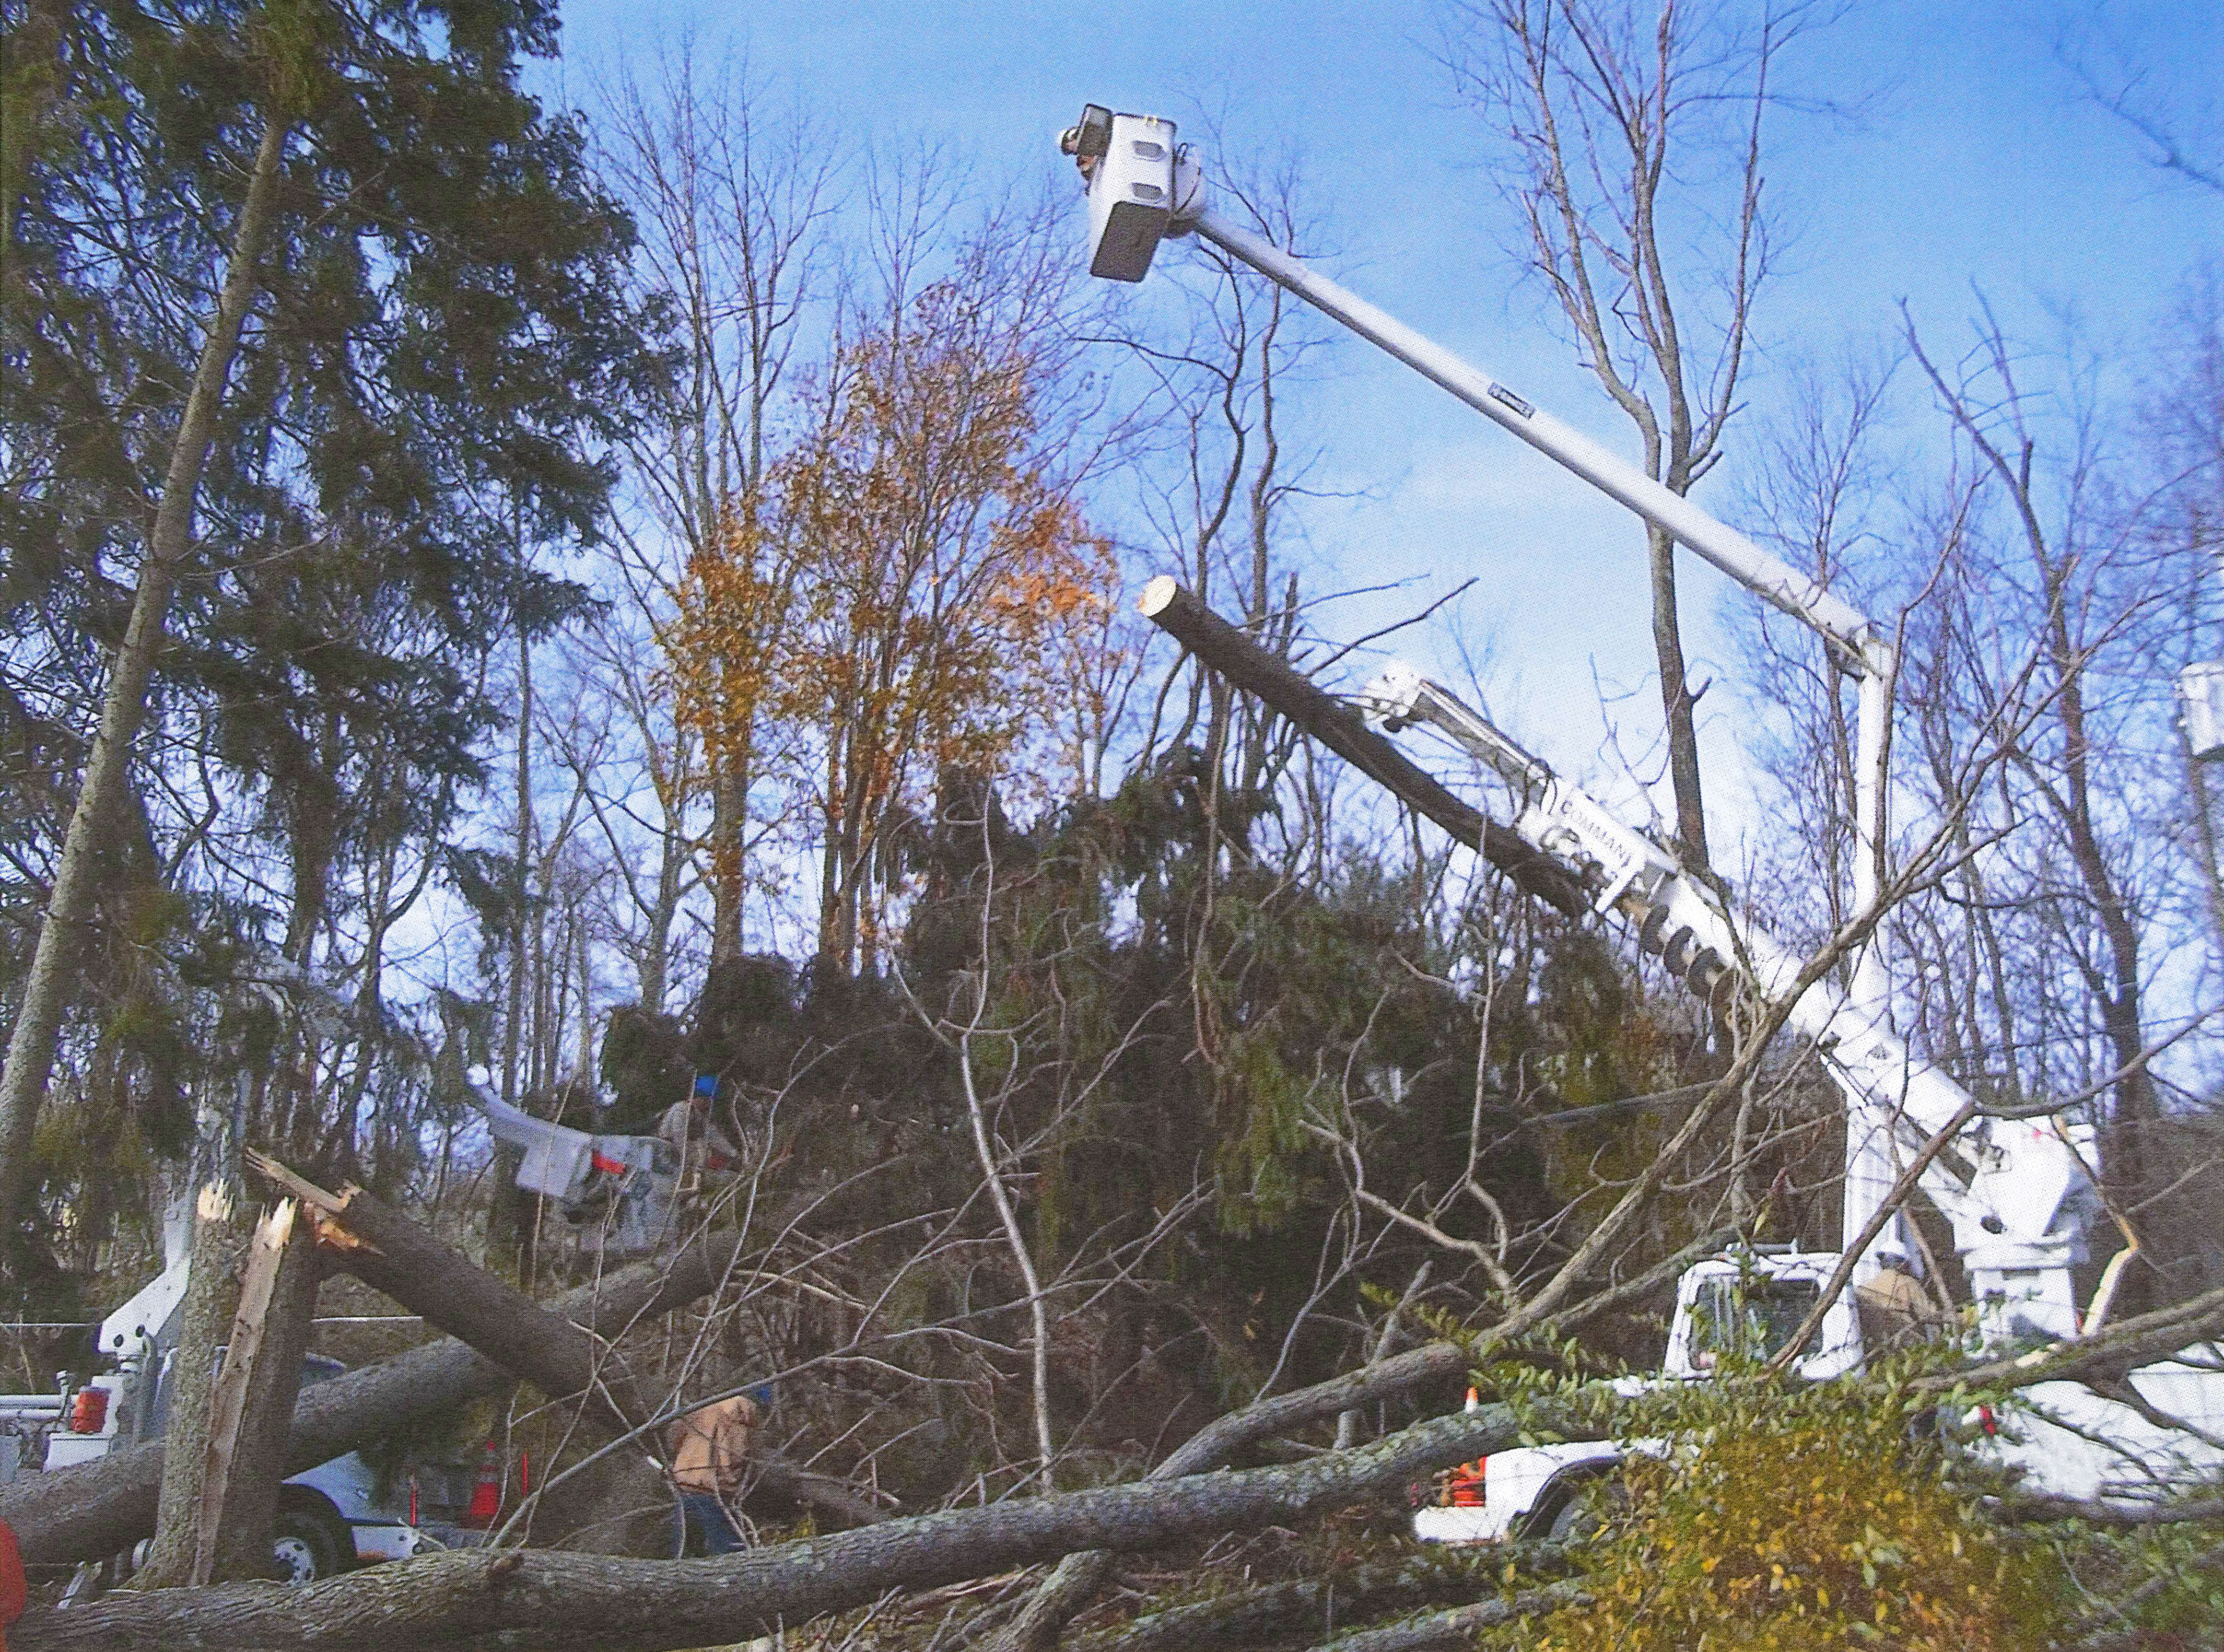 An SREC bucket reases high into the air over a large fallen tree